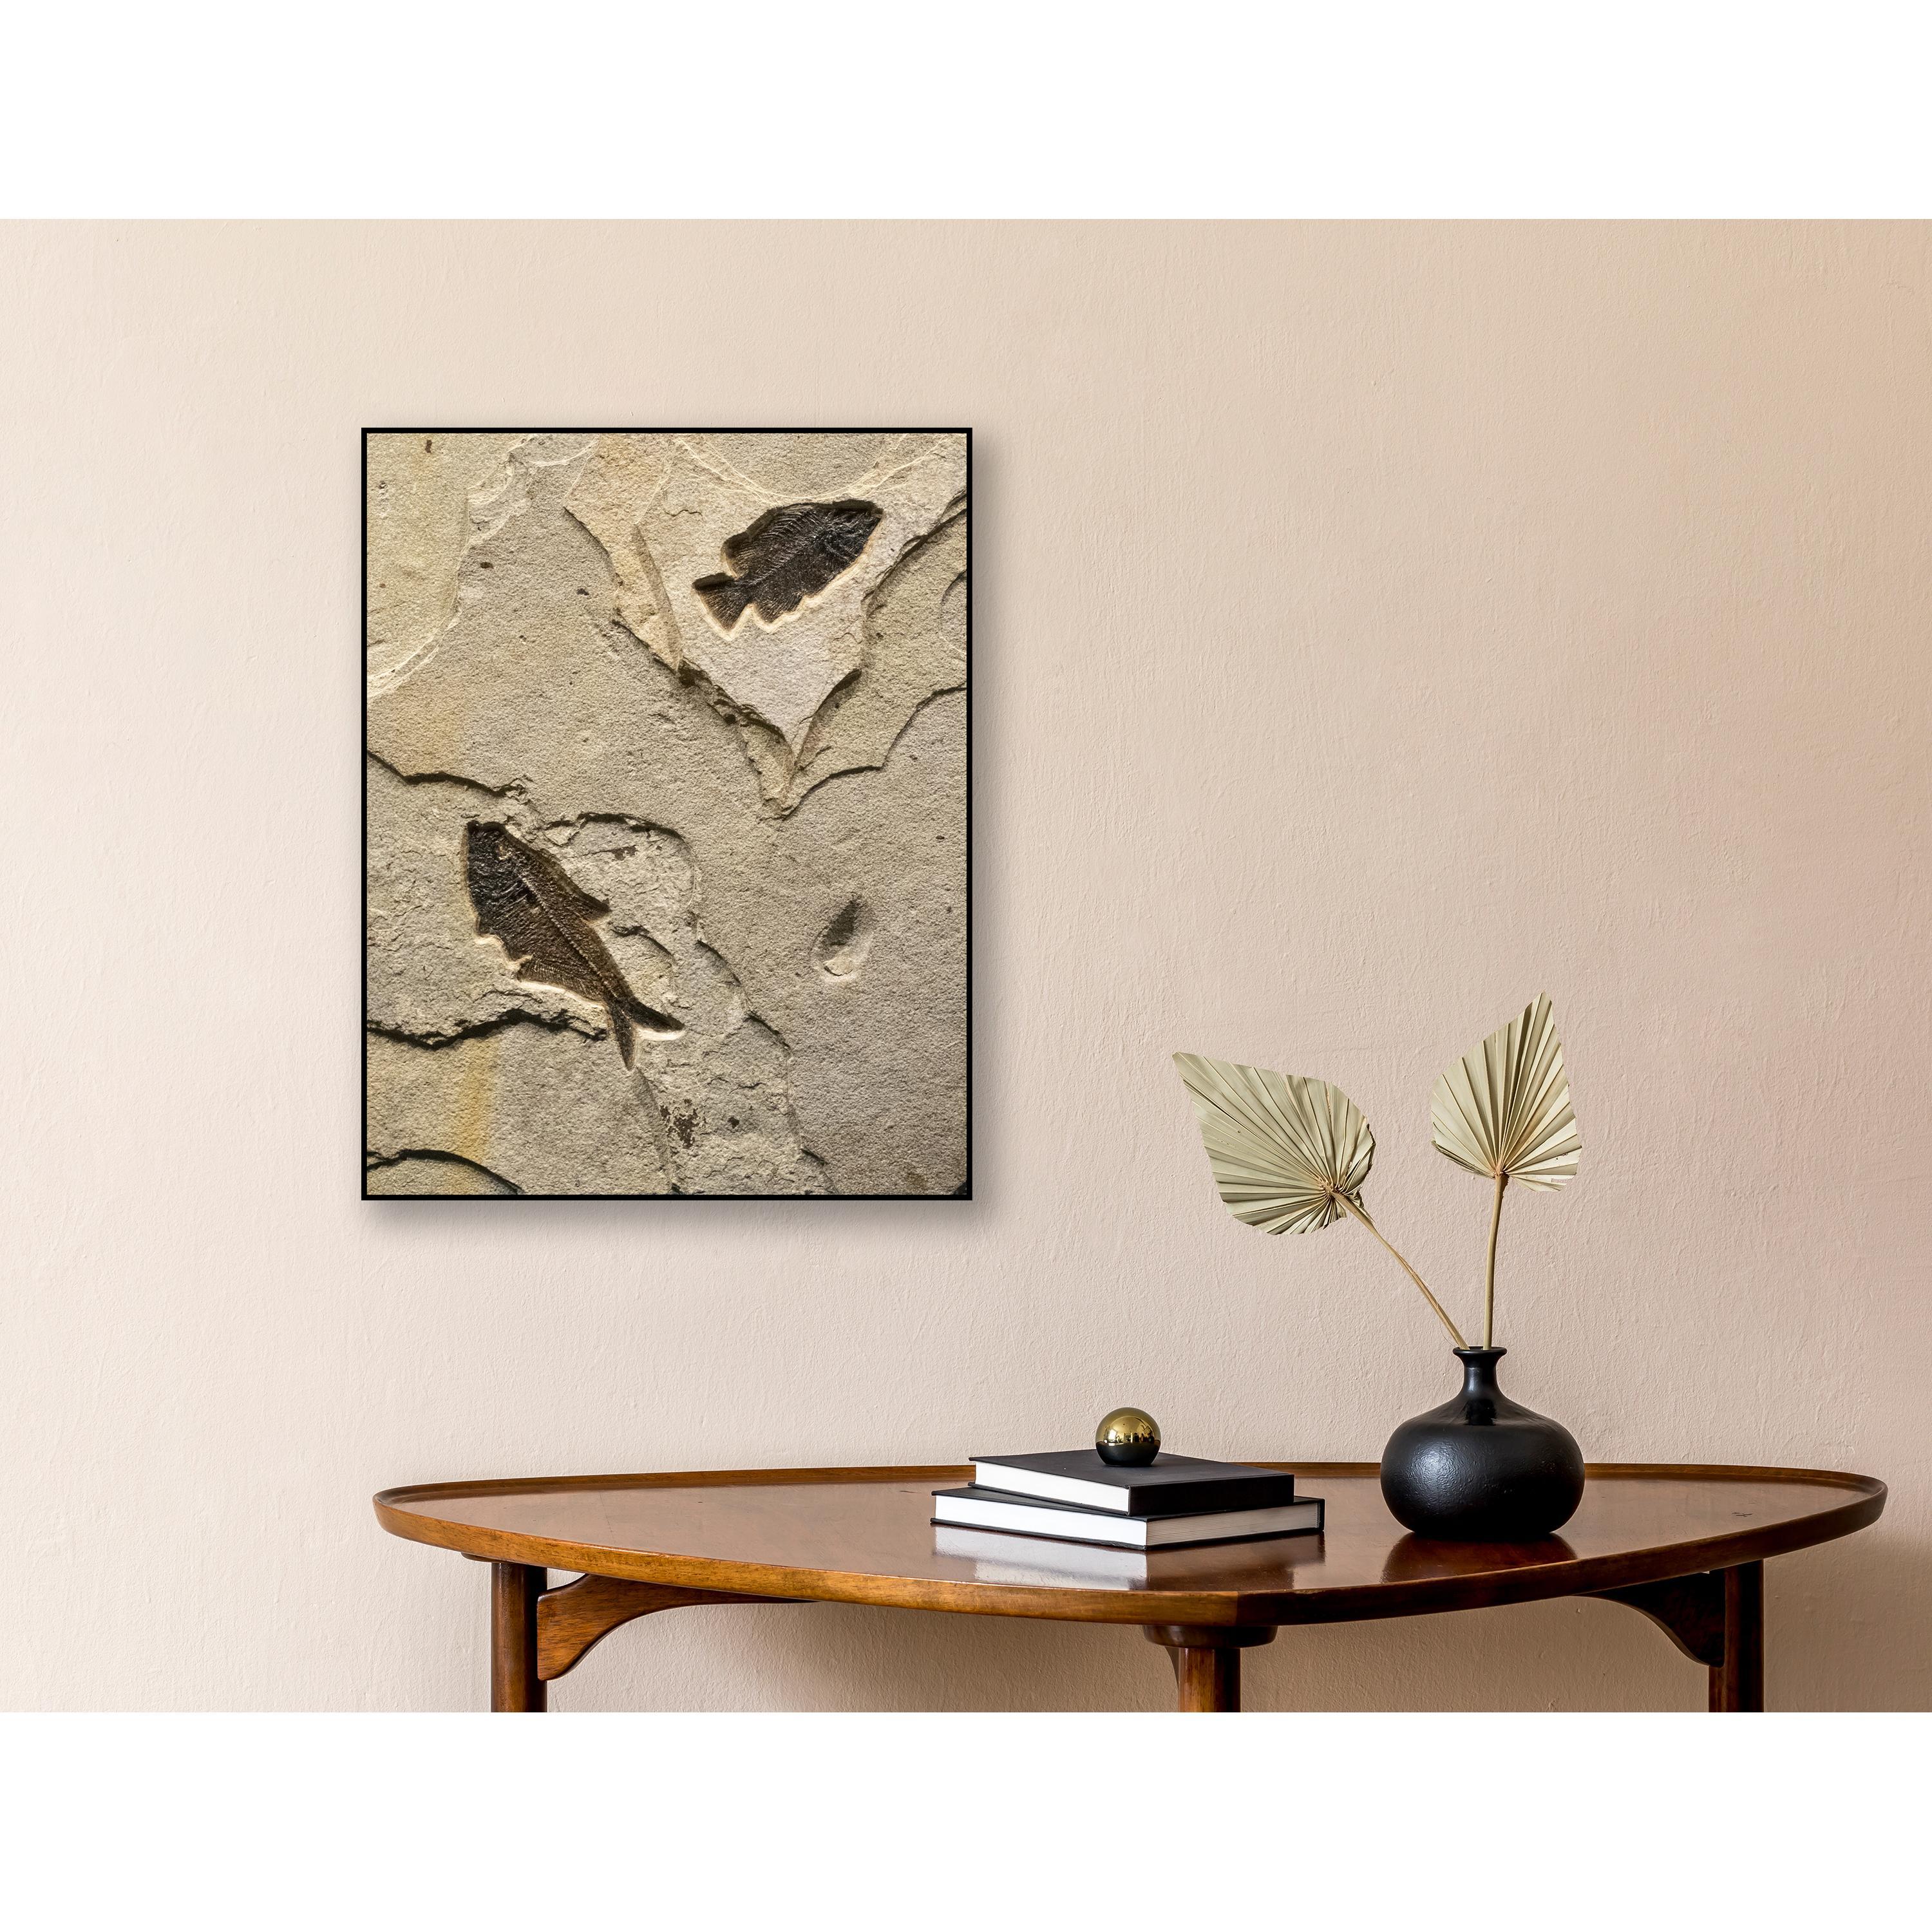 This exquisite fossil mural features a Diplomystus dentatus and a Cockerellites liops (formerly known as Priscacara), both of which are Eocene era fossils dating back about 50 million years. These ancient fish are forever preserved in a textured